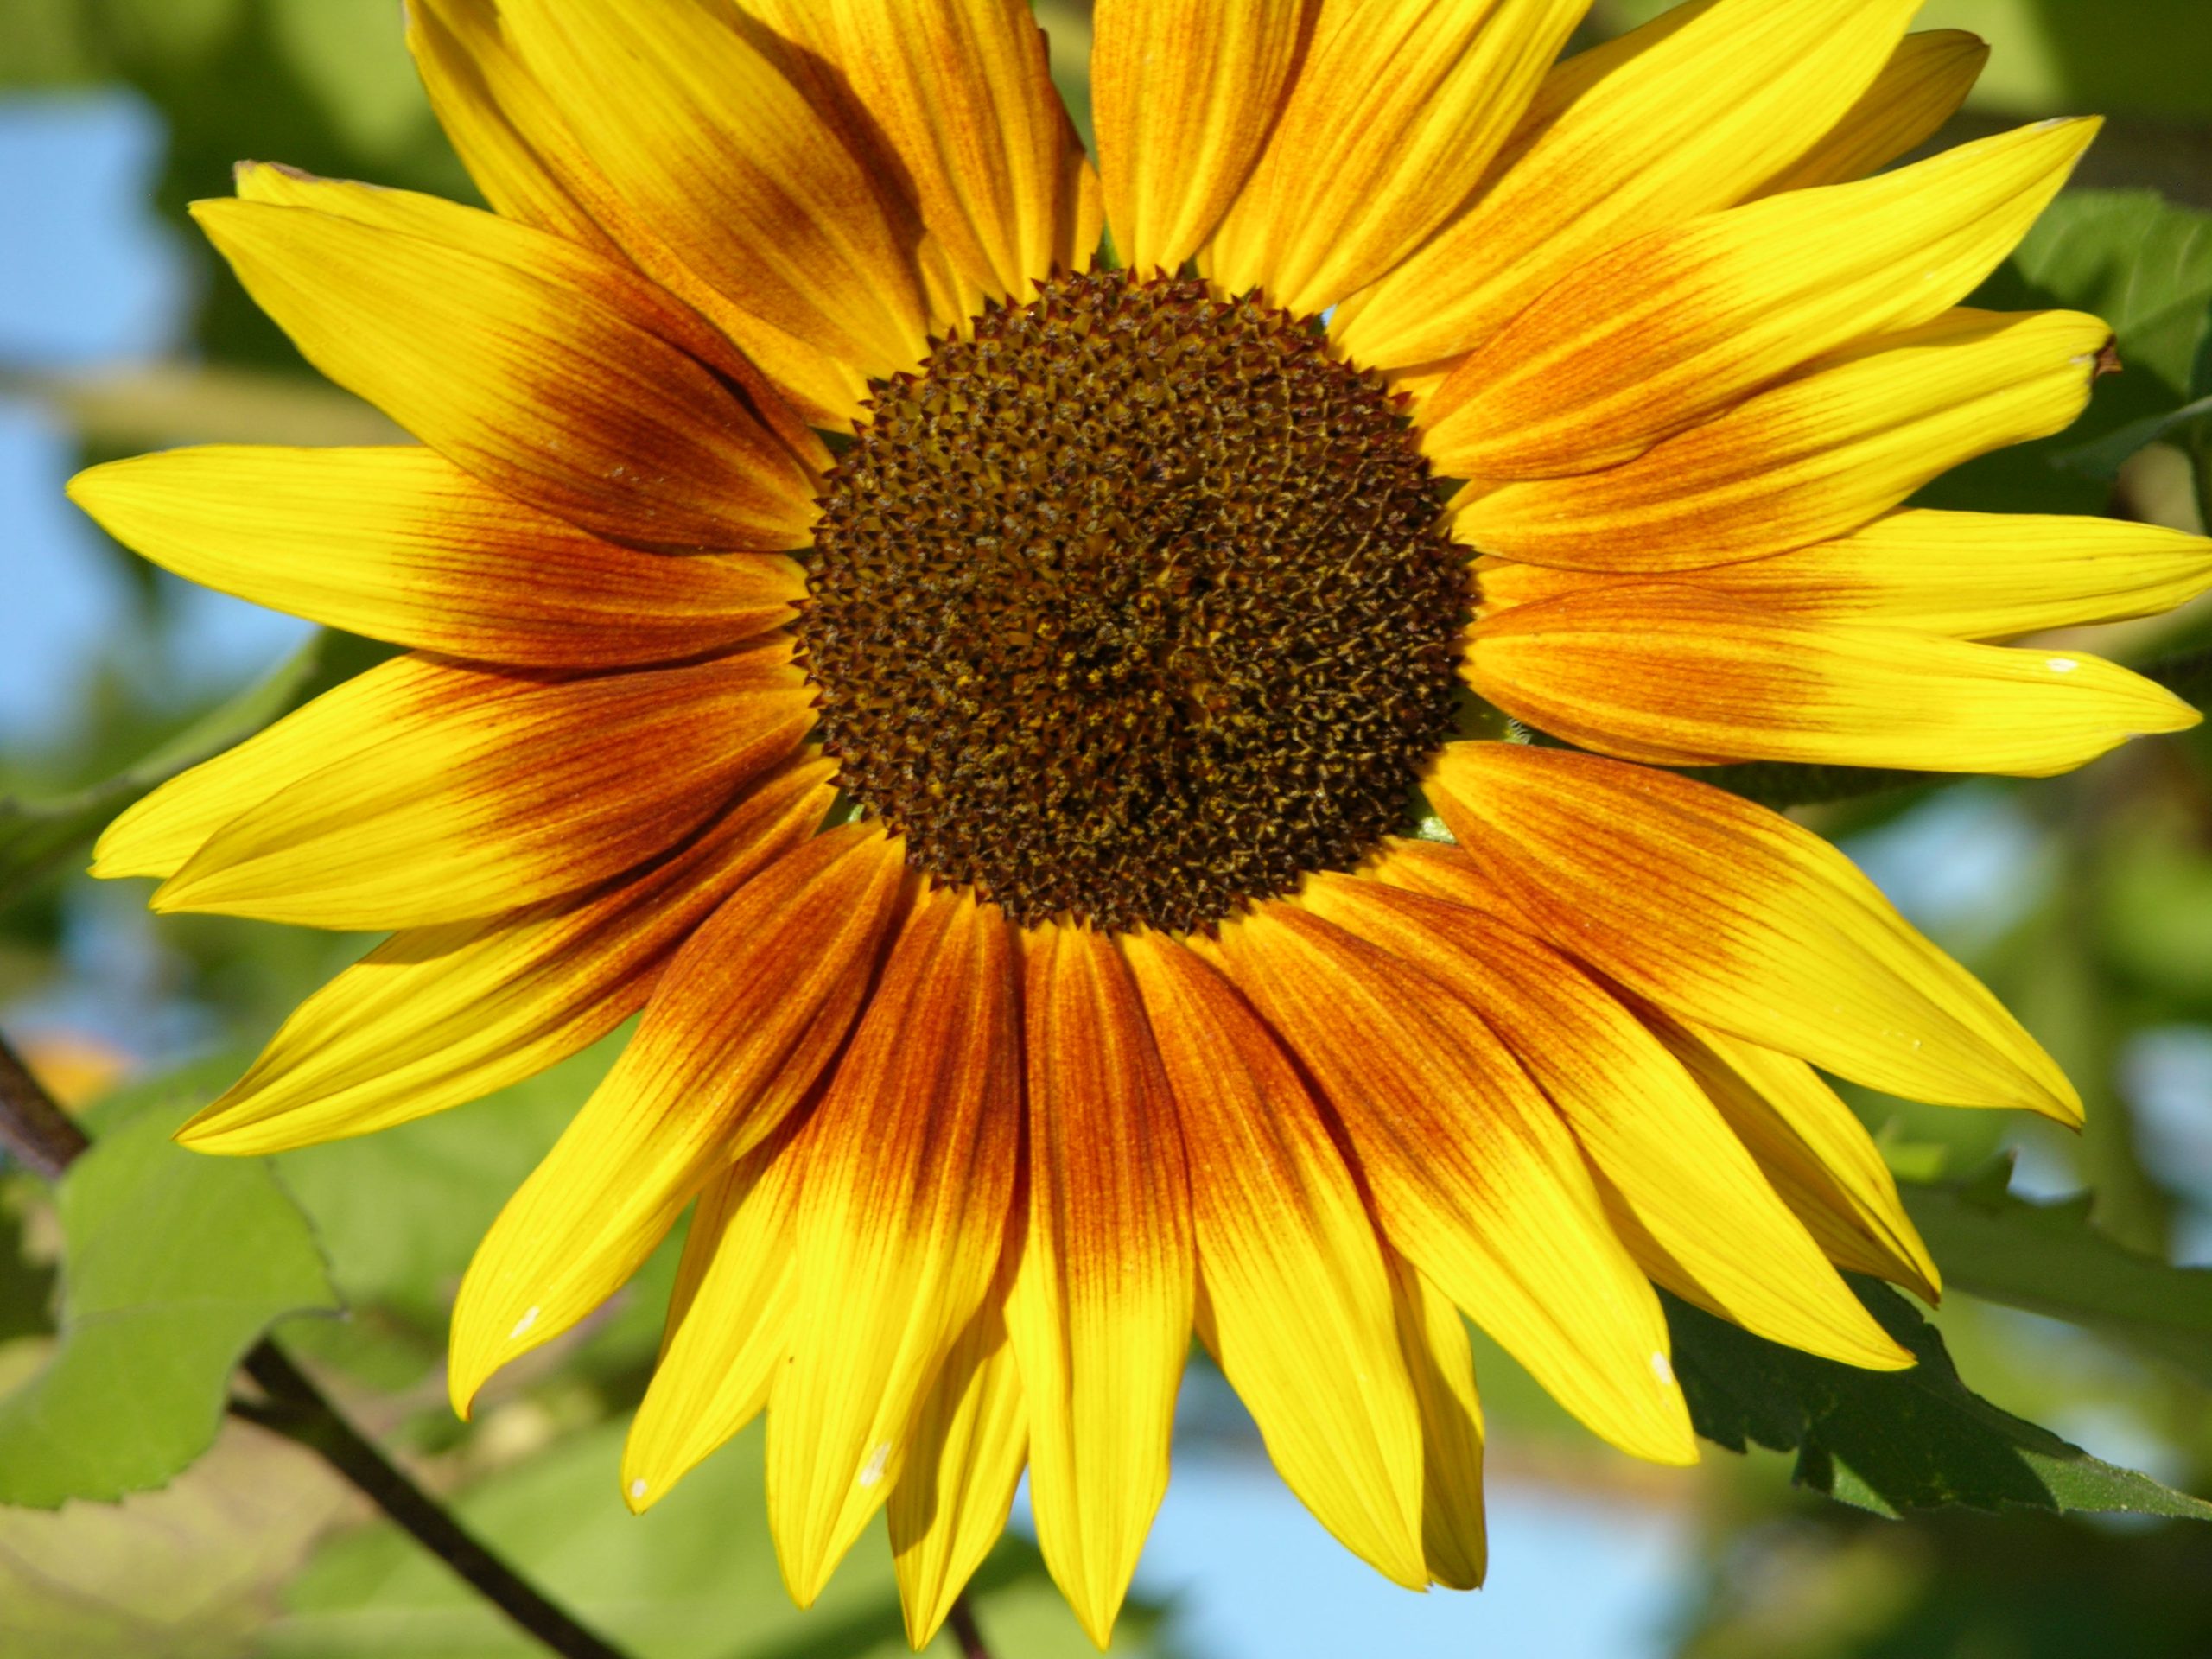 Sunflower # 2 (user submitted)